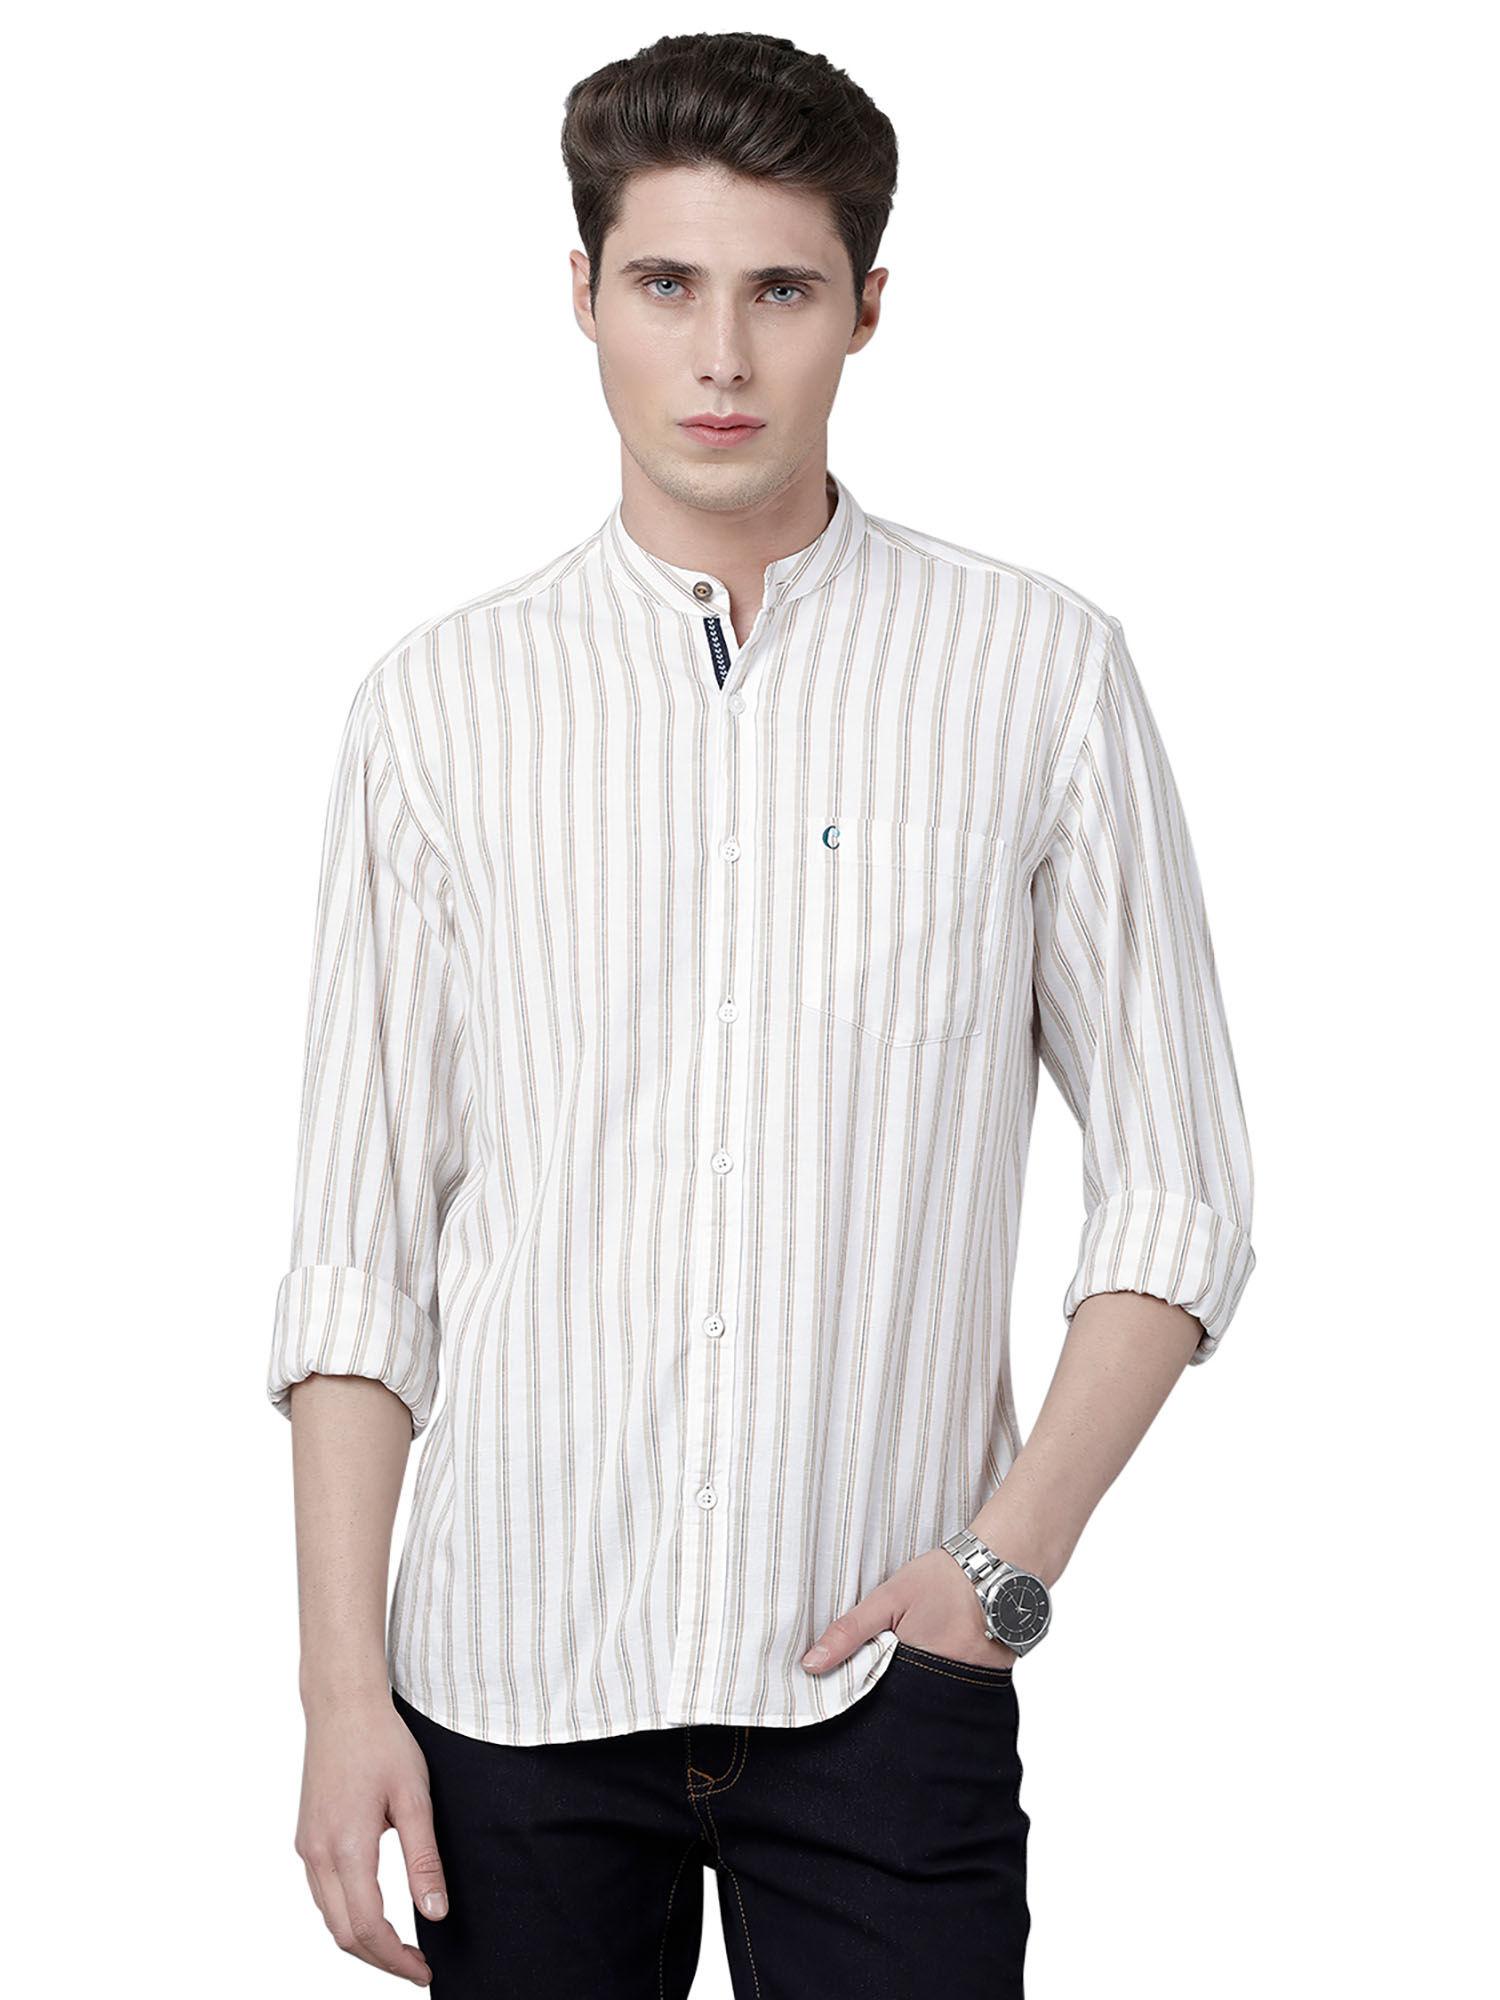 men's-cotton-linen-natural-/-brown-striped-slim-fit-full-sleeve-casual-shirt